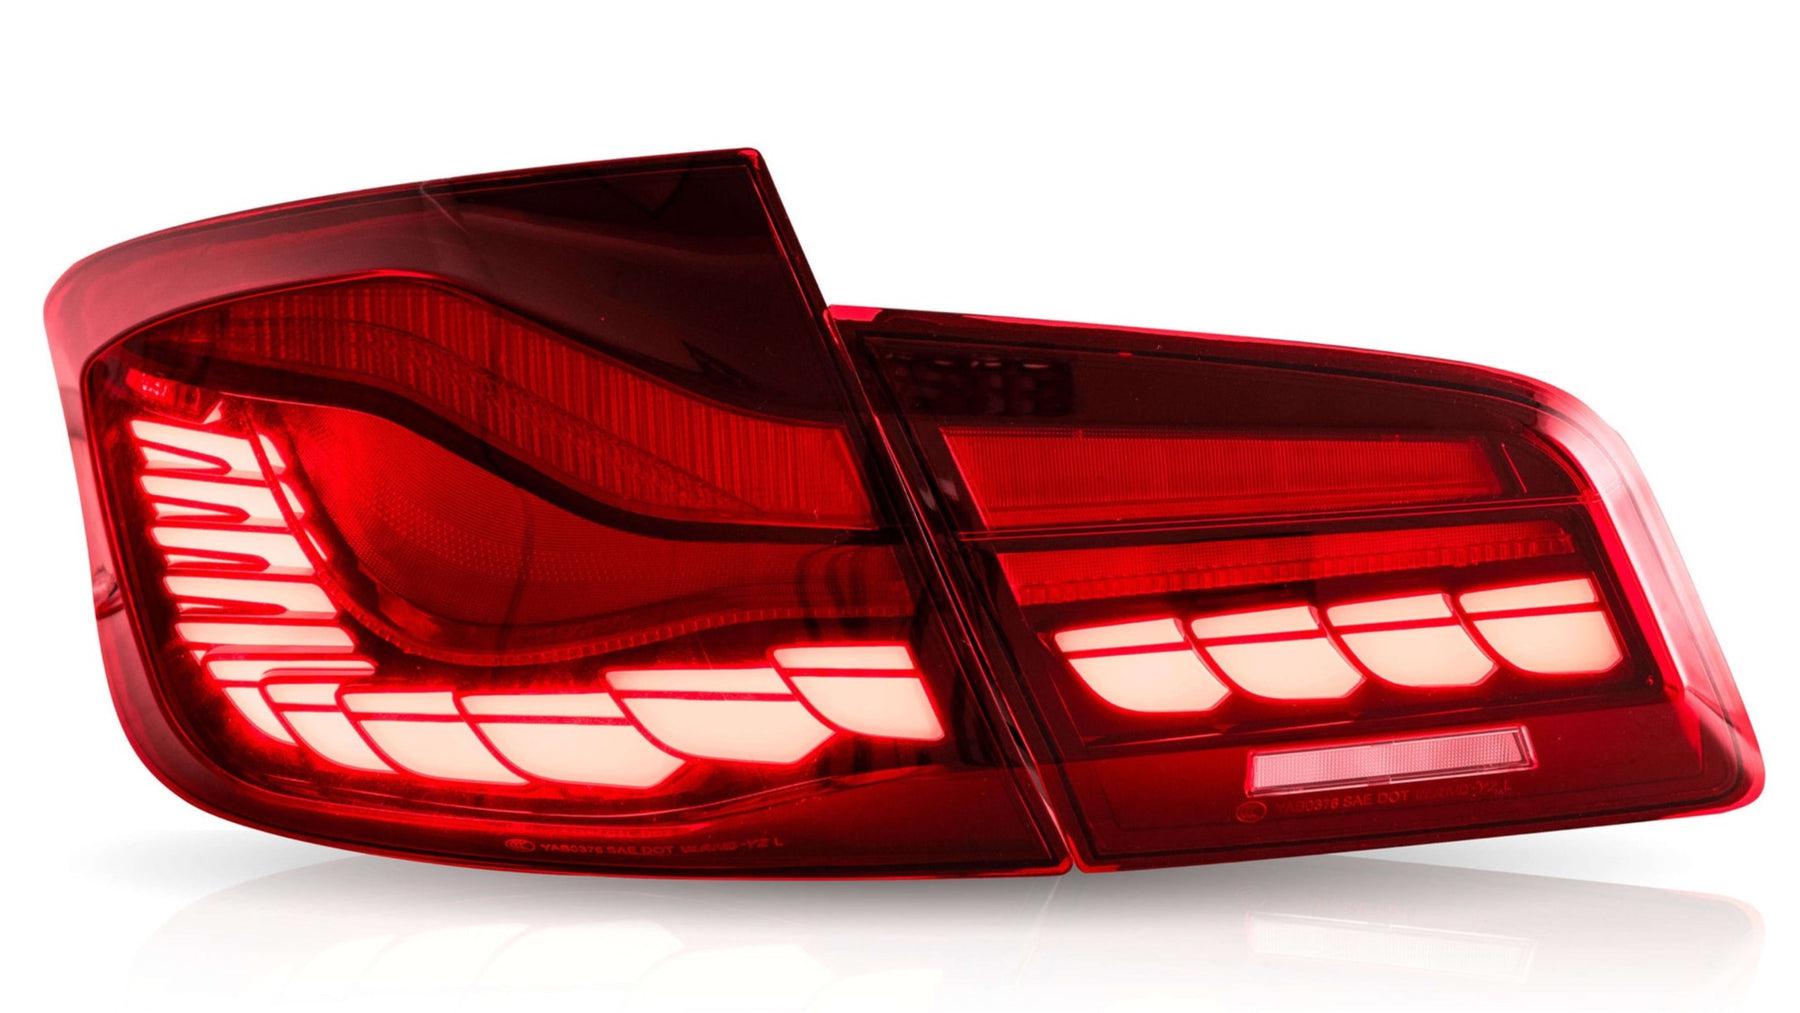 GTS Style OLED Taillights - BMW F10 M5 & 5 Series